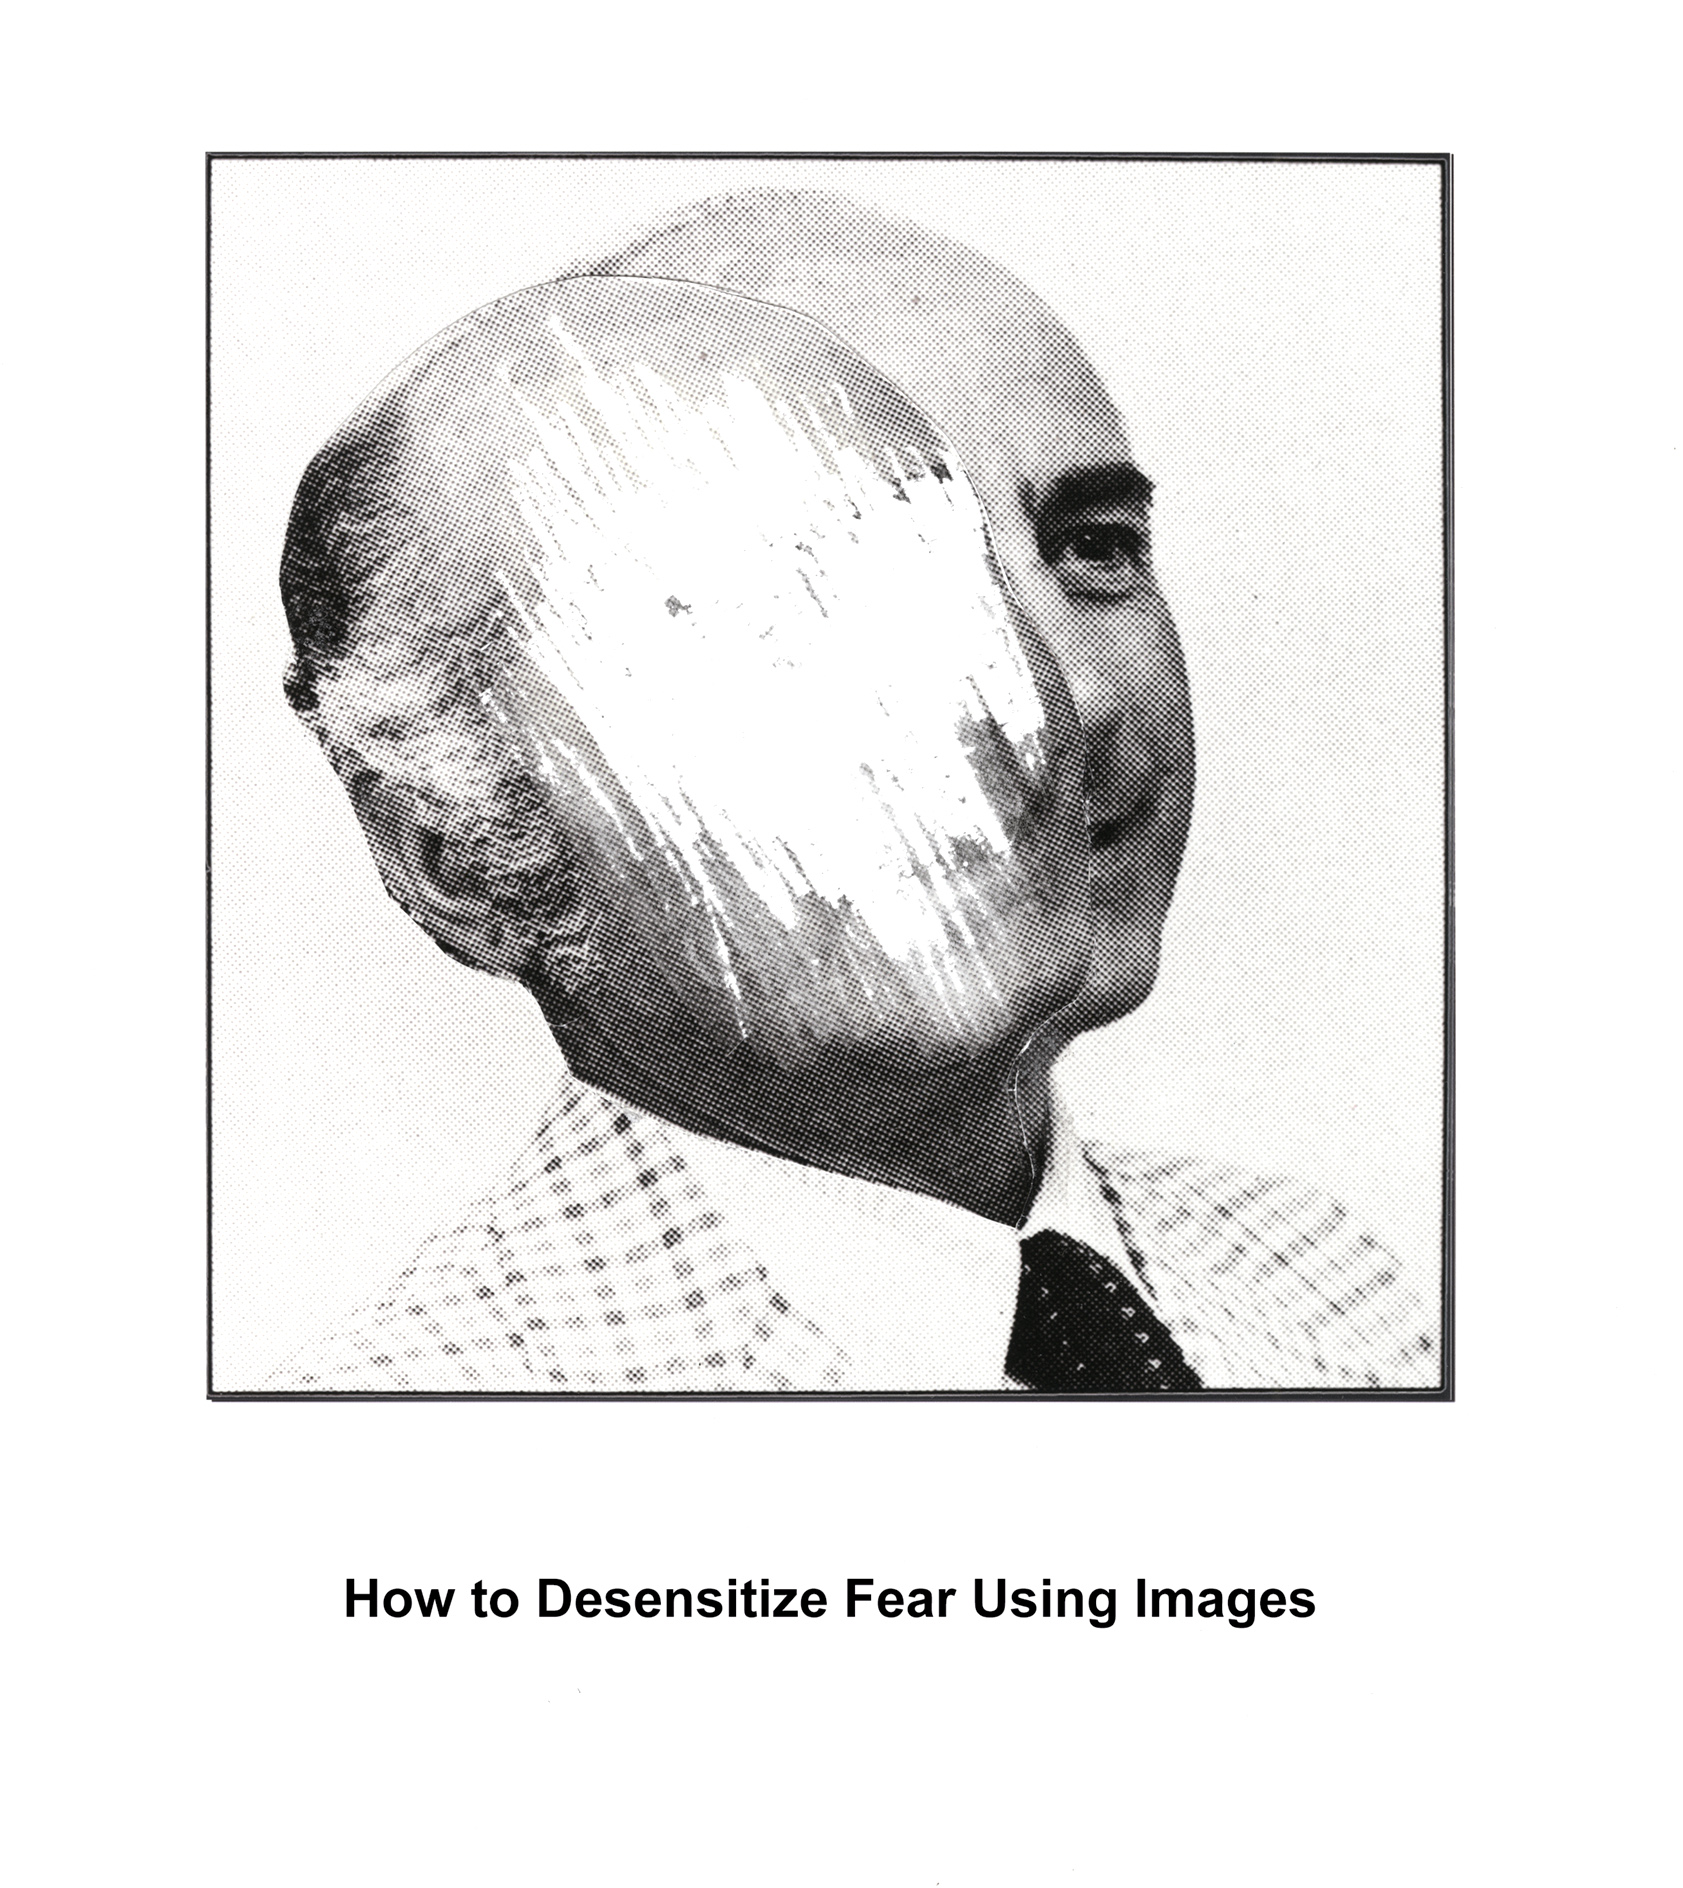 Jenny Laiwint, How to Desensitize Fear Using Images